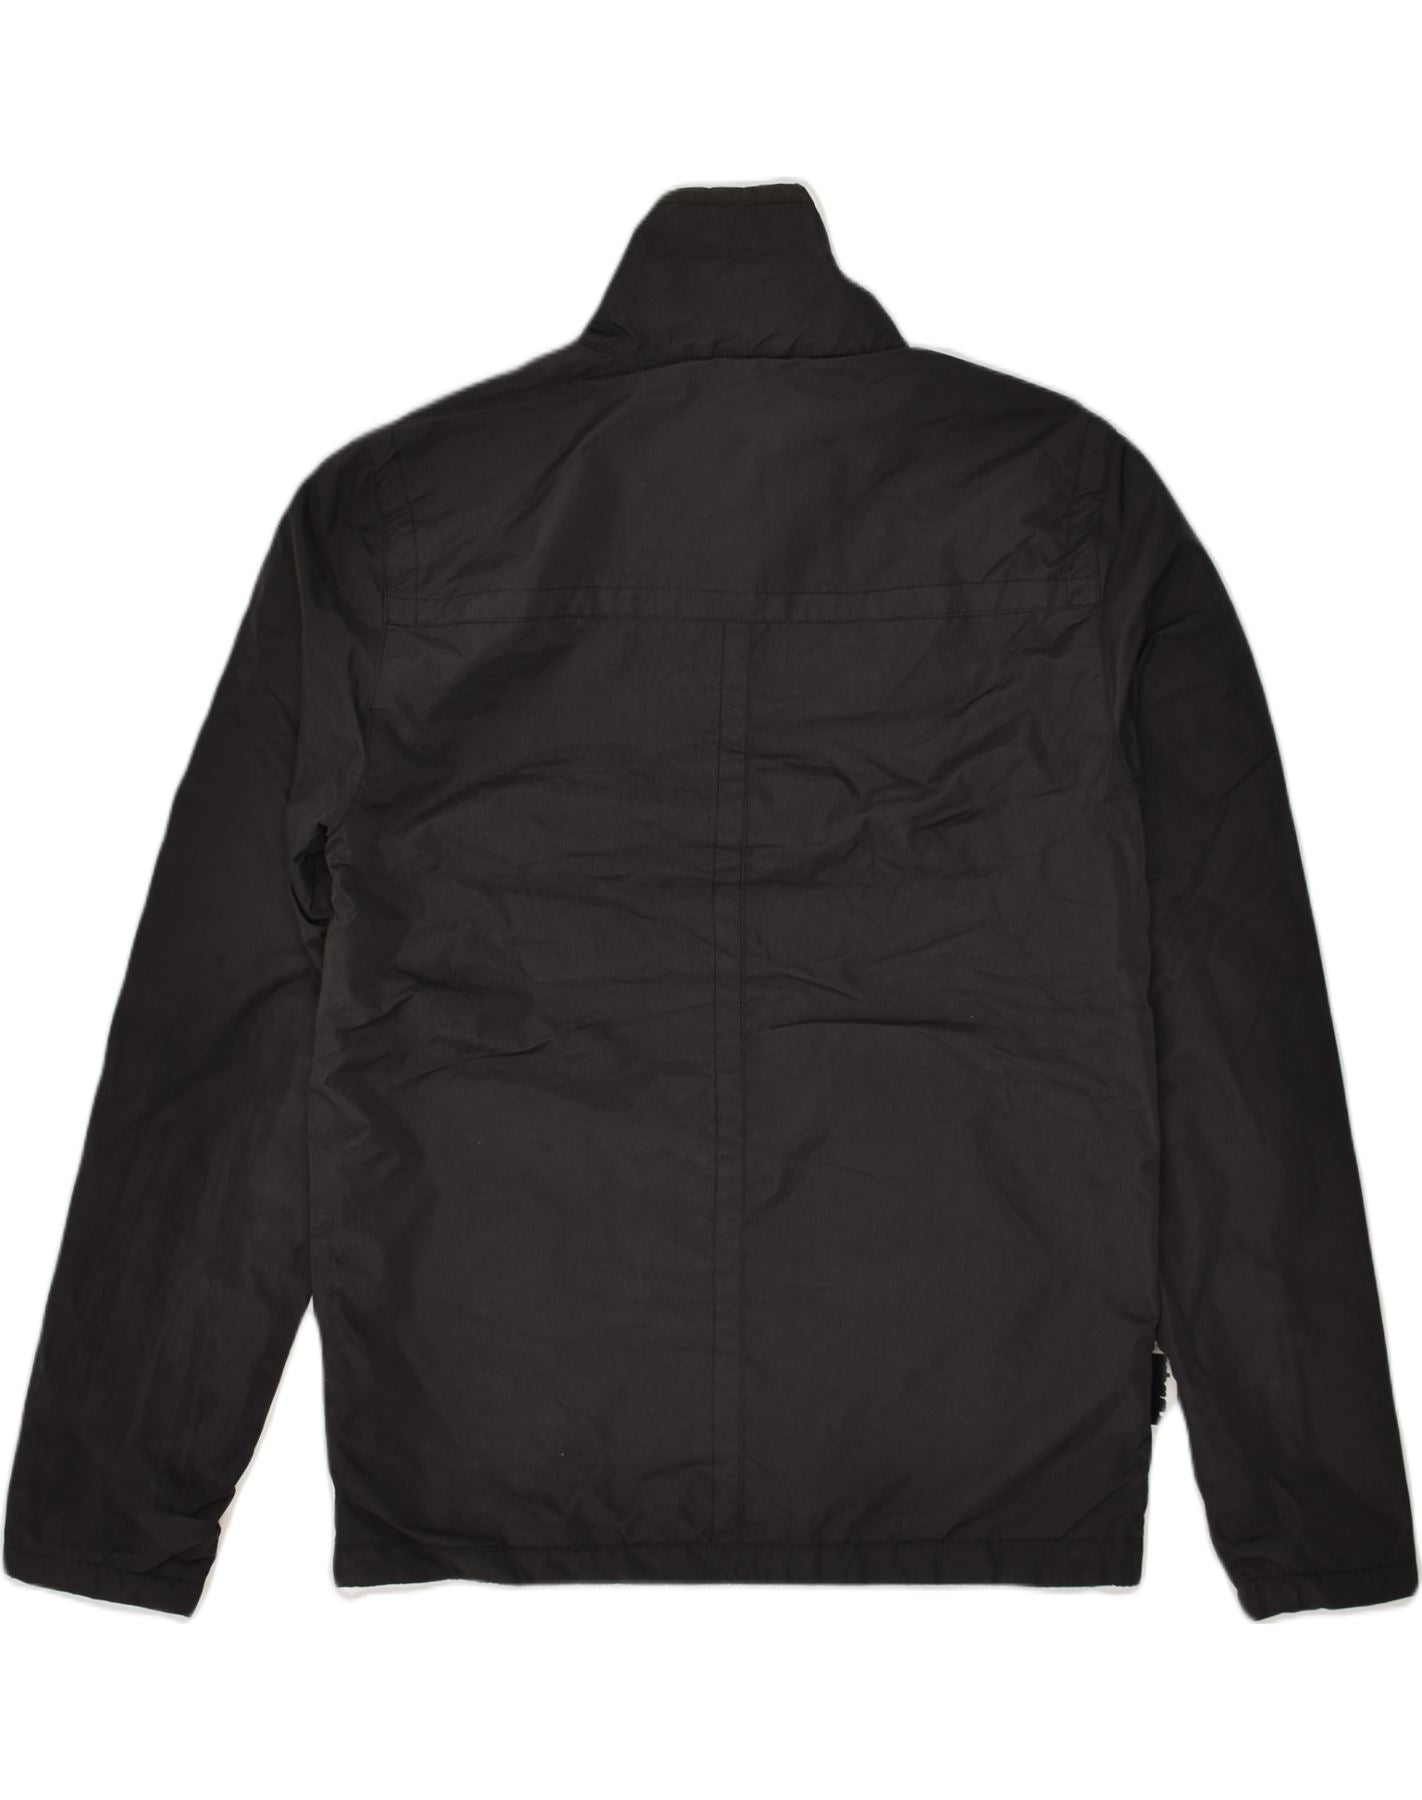 Superdry Moody Quilted Bomber Jacket - Men's Mens Jackets